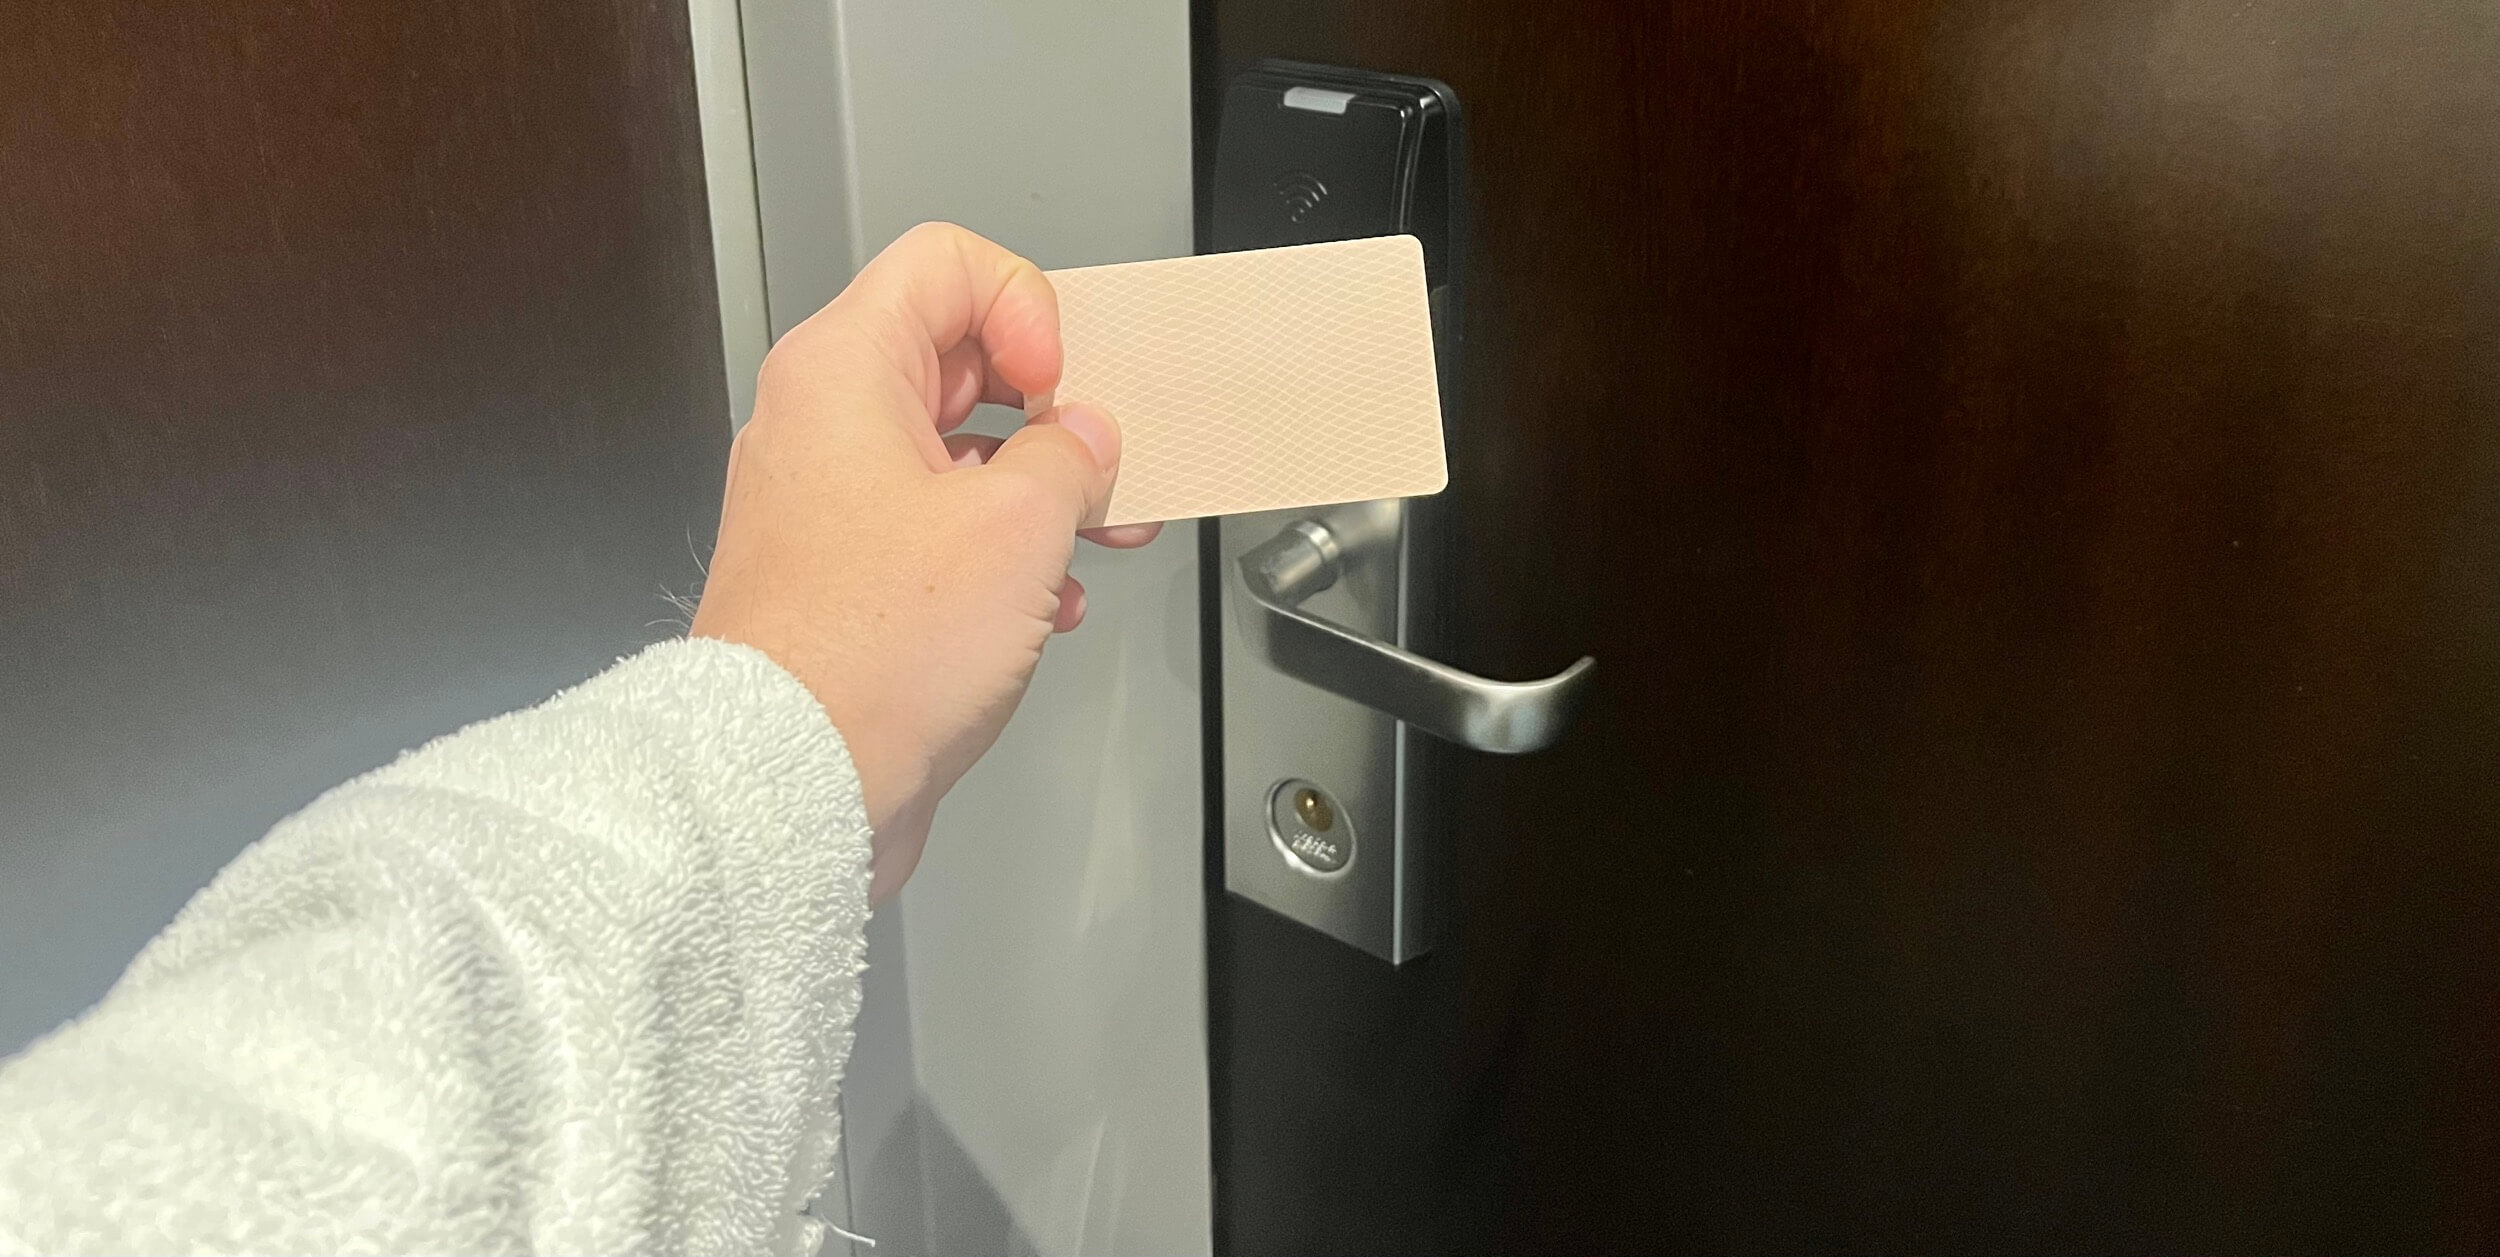 What’s a broken keycard moment in your business?